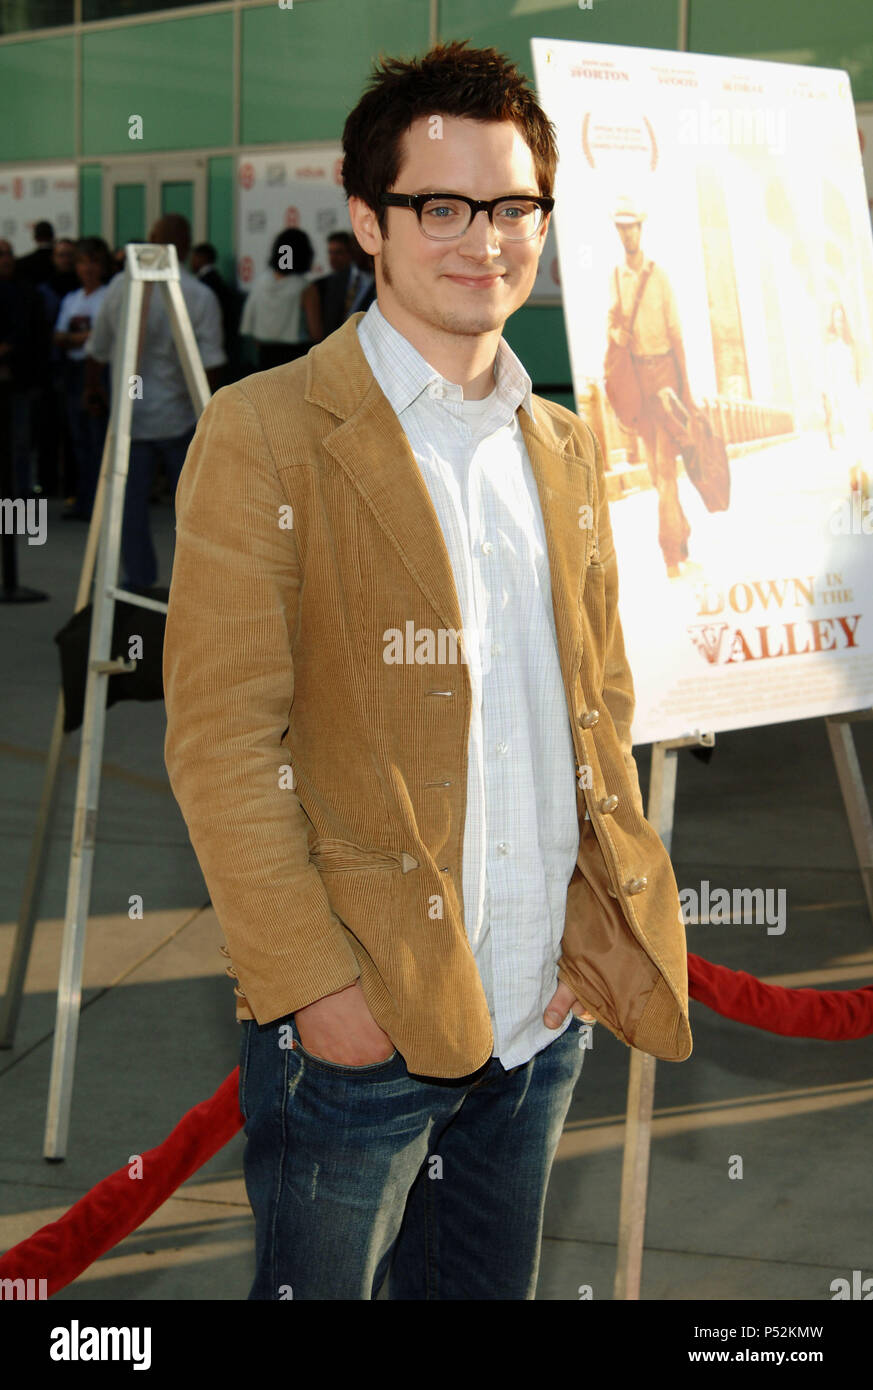 Elijah Wood arriving at the Down In The Valley Premiere at ht e LA Film Festival Opening Night at the Arclight Theatre in Los Angeles. June 16, 2005.WoodElijah015 Red Carpet Event, Vertical, USA, Film Industry, Celebrities,  Photography, Bestof, Arts Culture and Entertainment, Topix Celebrities fashion /  Vertical, Best of, Event in Hollywood Life - California,  Red Carpet and backstage, USA, Film Industry, Celebrities,  movie celebrities, TV celebrities, Music celebrities, Photography, Bestof, Arts Culture and Entertainment,  Topix, vertical, one person,, from the years , 2003 to 2005, inquir Stock Photo